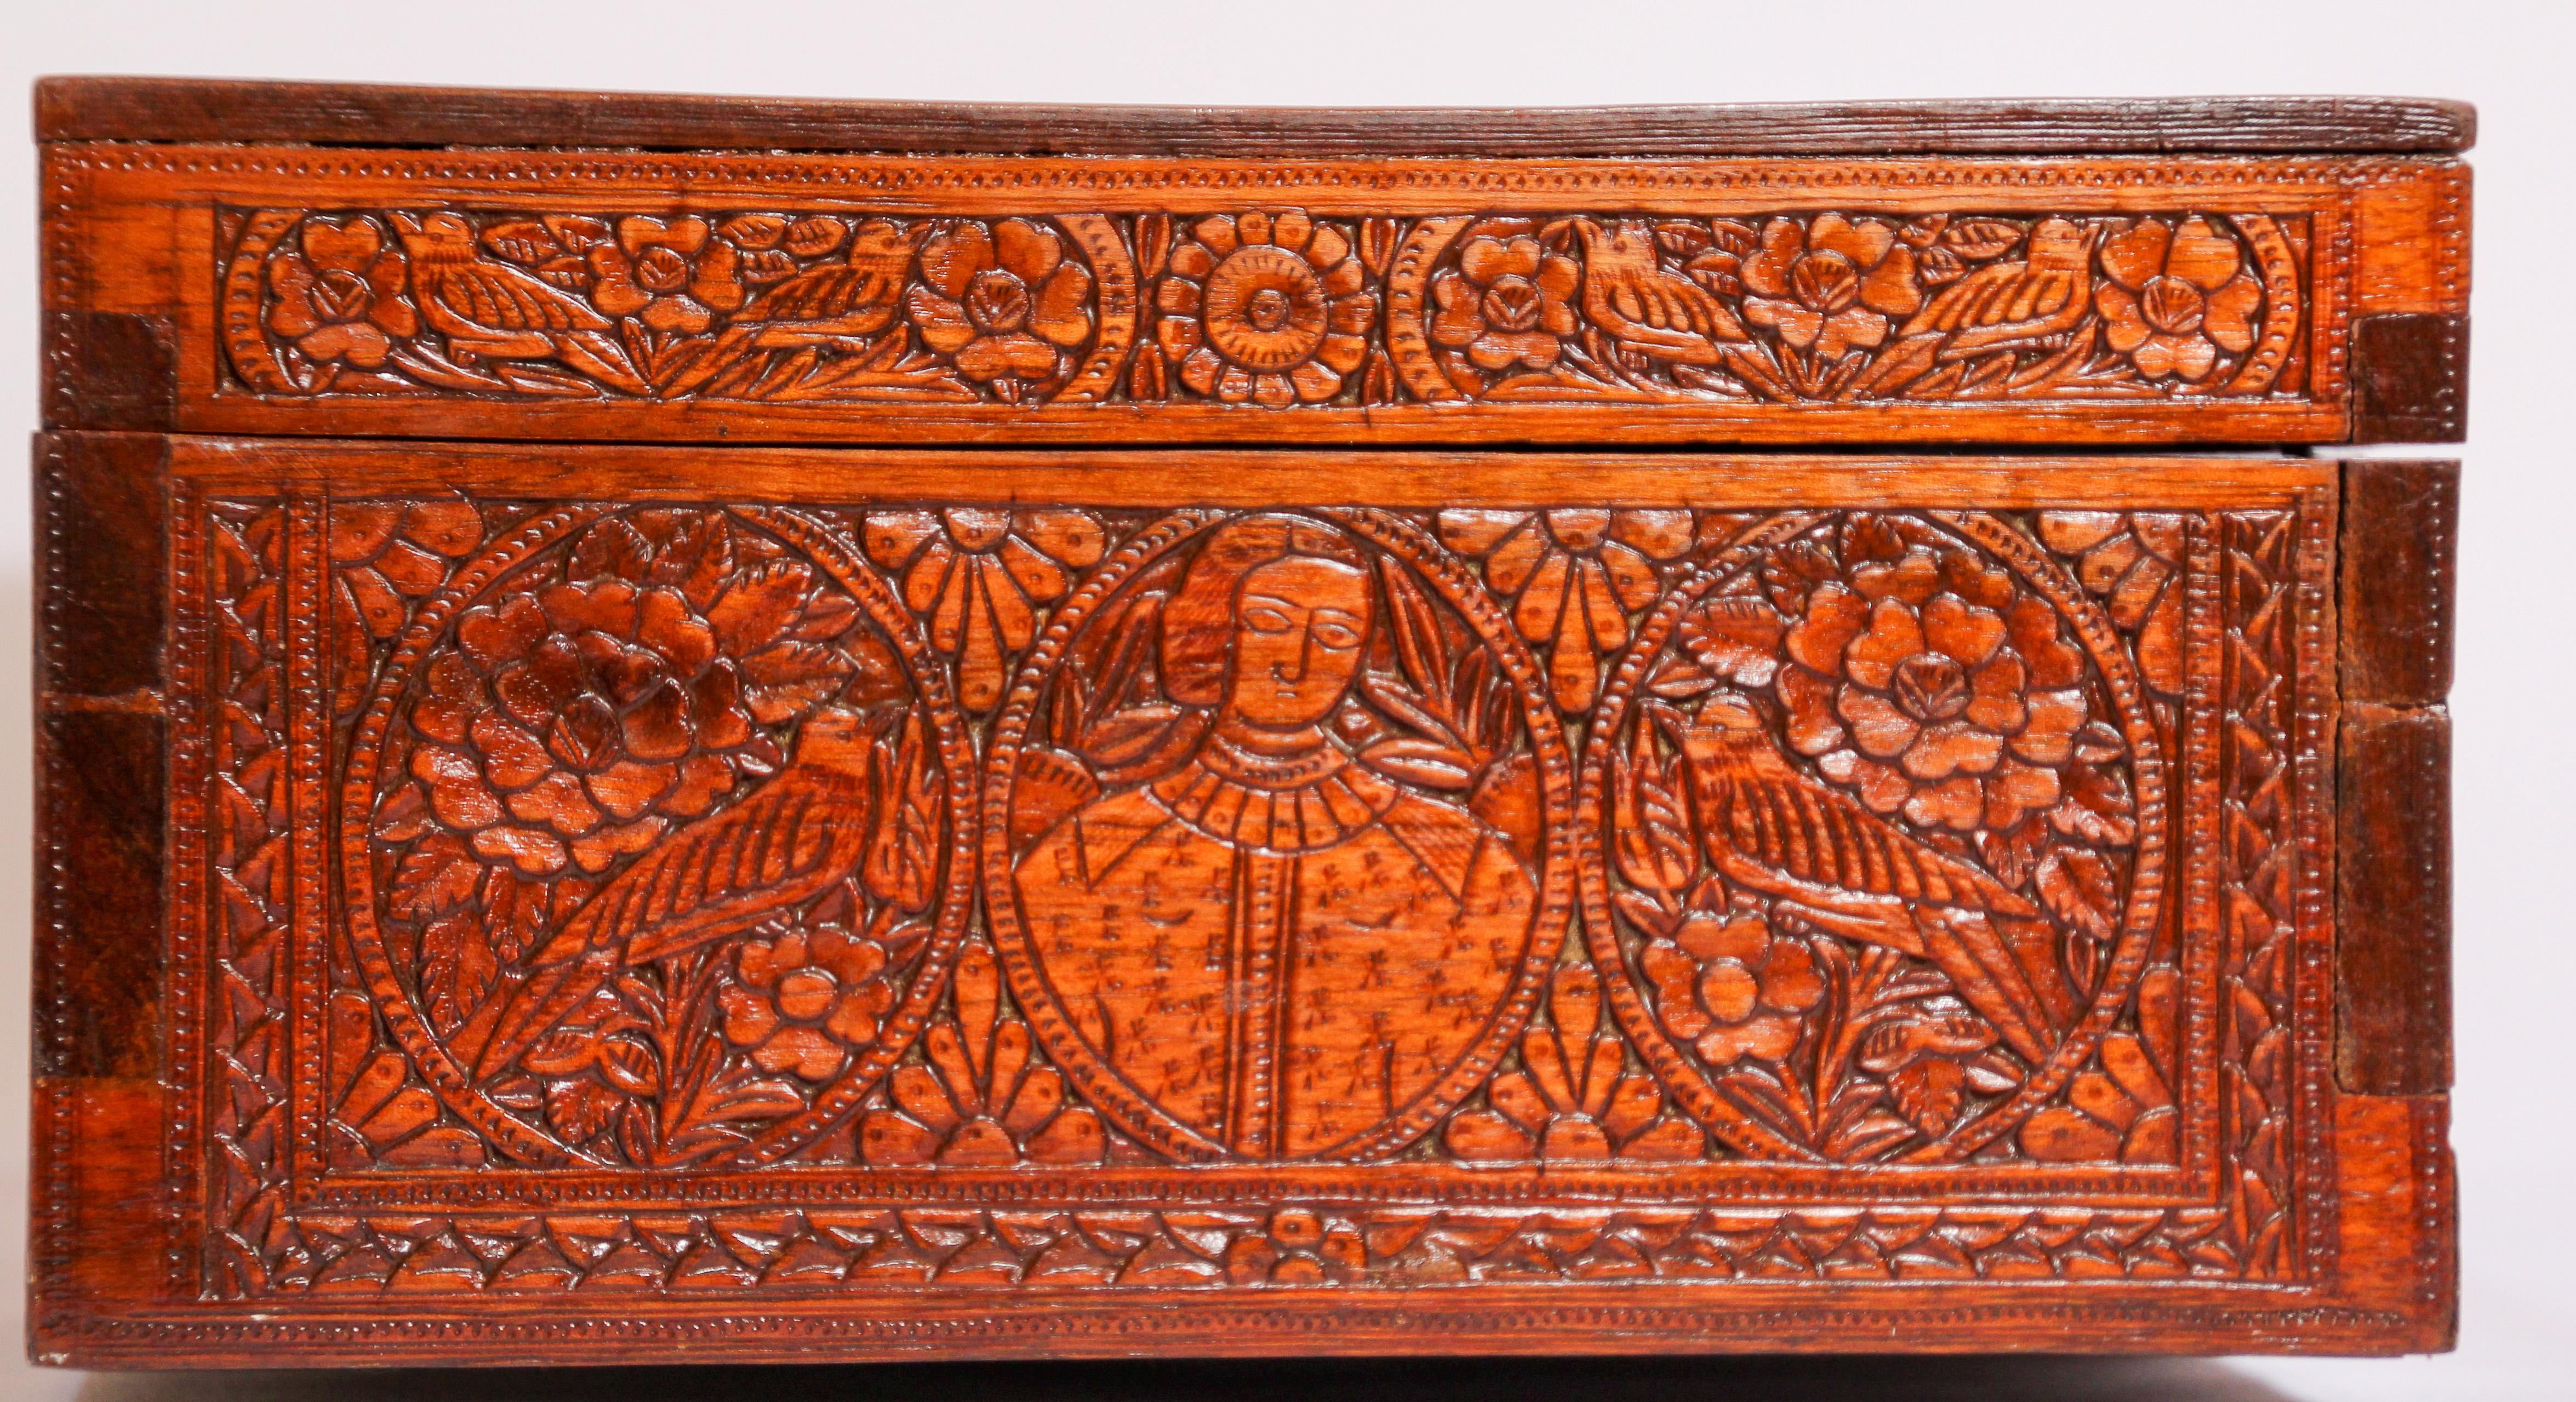 Large Early 19th Century Antique Hand Carved Wooden Mughal Decorative Box For Sale 5